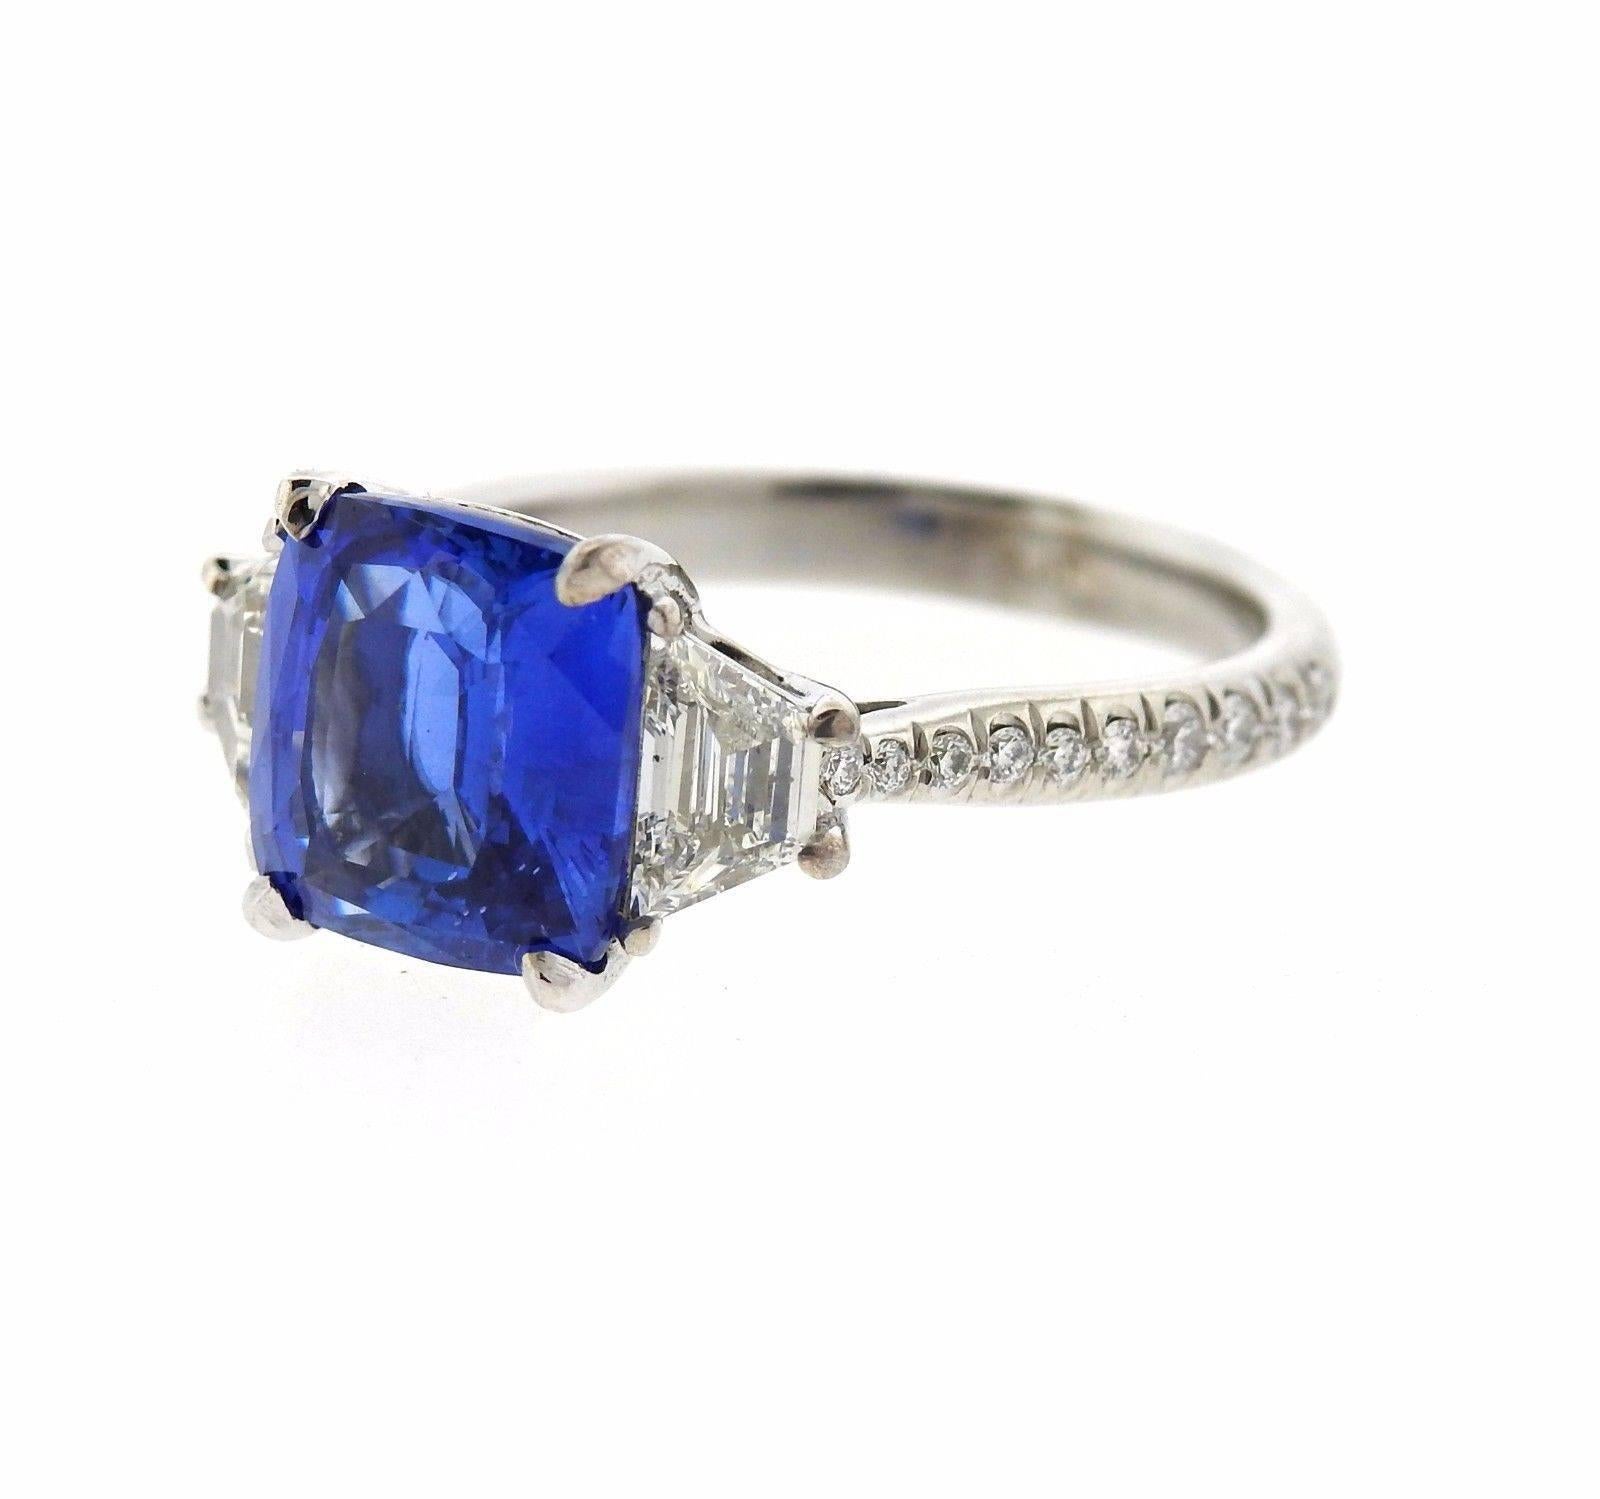 A platinum ring set with a 4.04ct natural sapphire and approximately 0.75ctw of G/VS diamonds.  The ring is a size 6, ring top is 9.2mm x 14.6mm.  The weight of the piece is 5.9 grams.